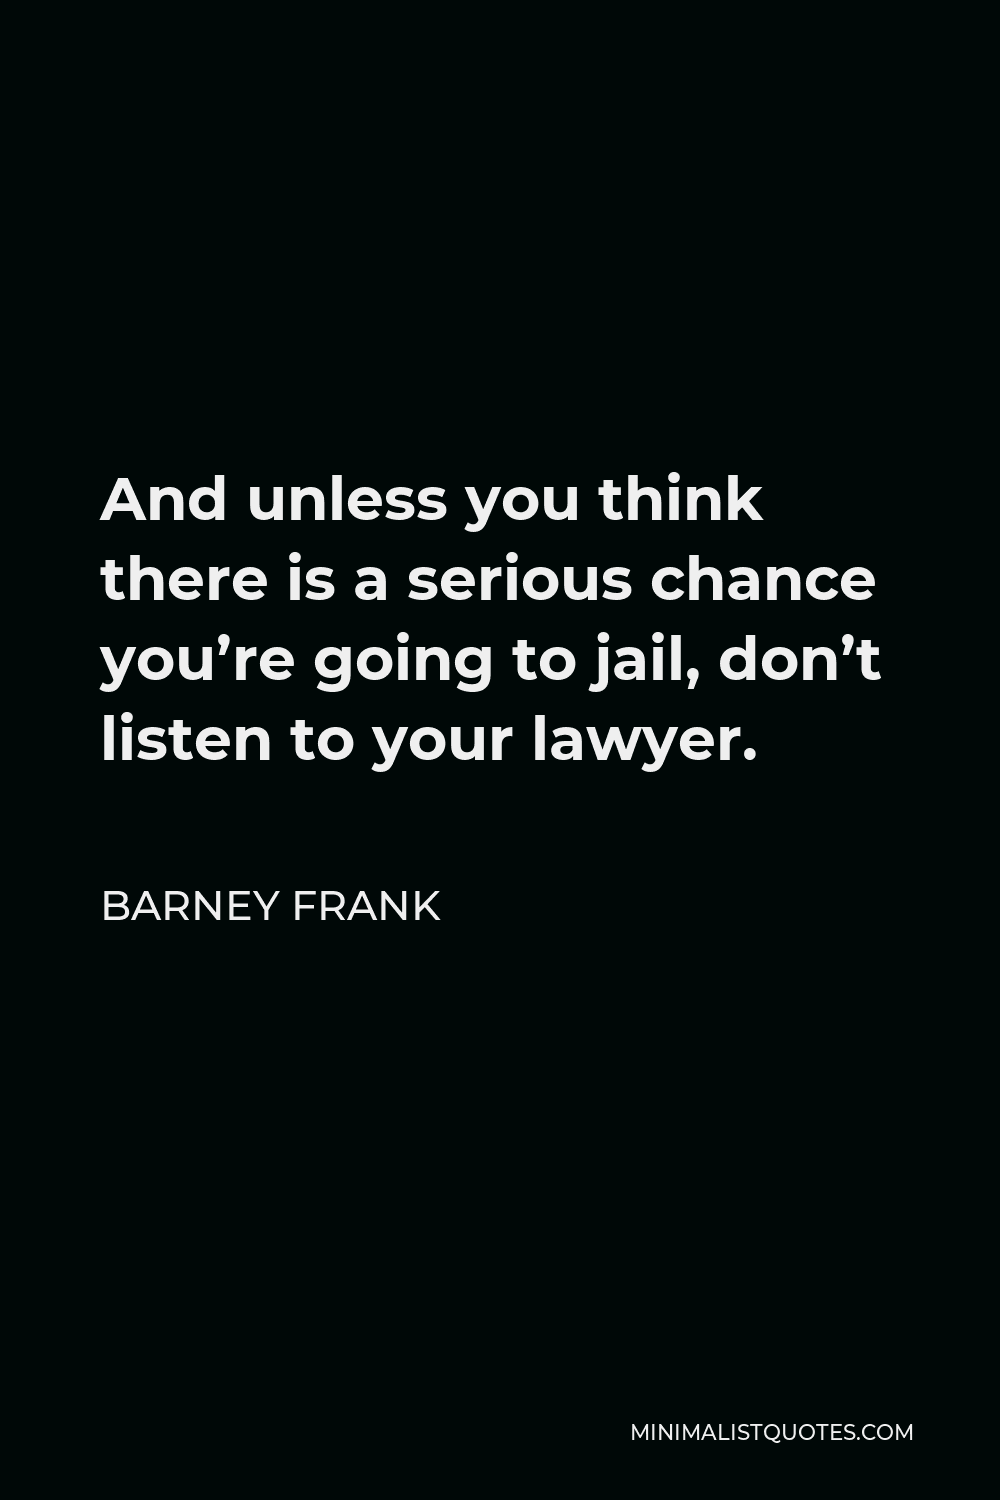 Barney Frank Quote - And unless you think there is a serious chance you’re going to jail, don’t listen to your lawyer.